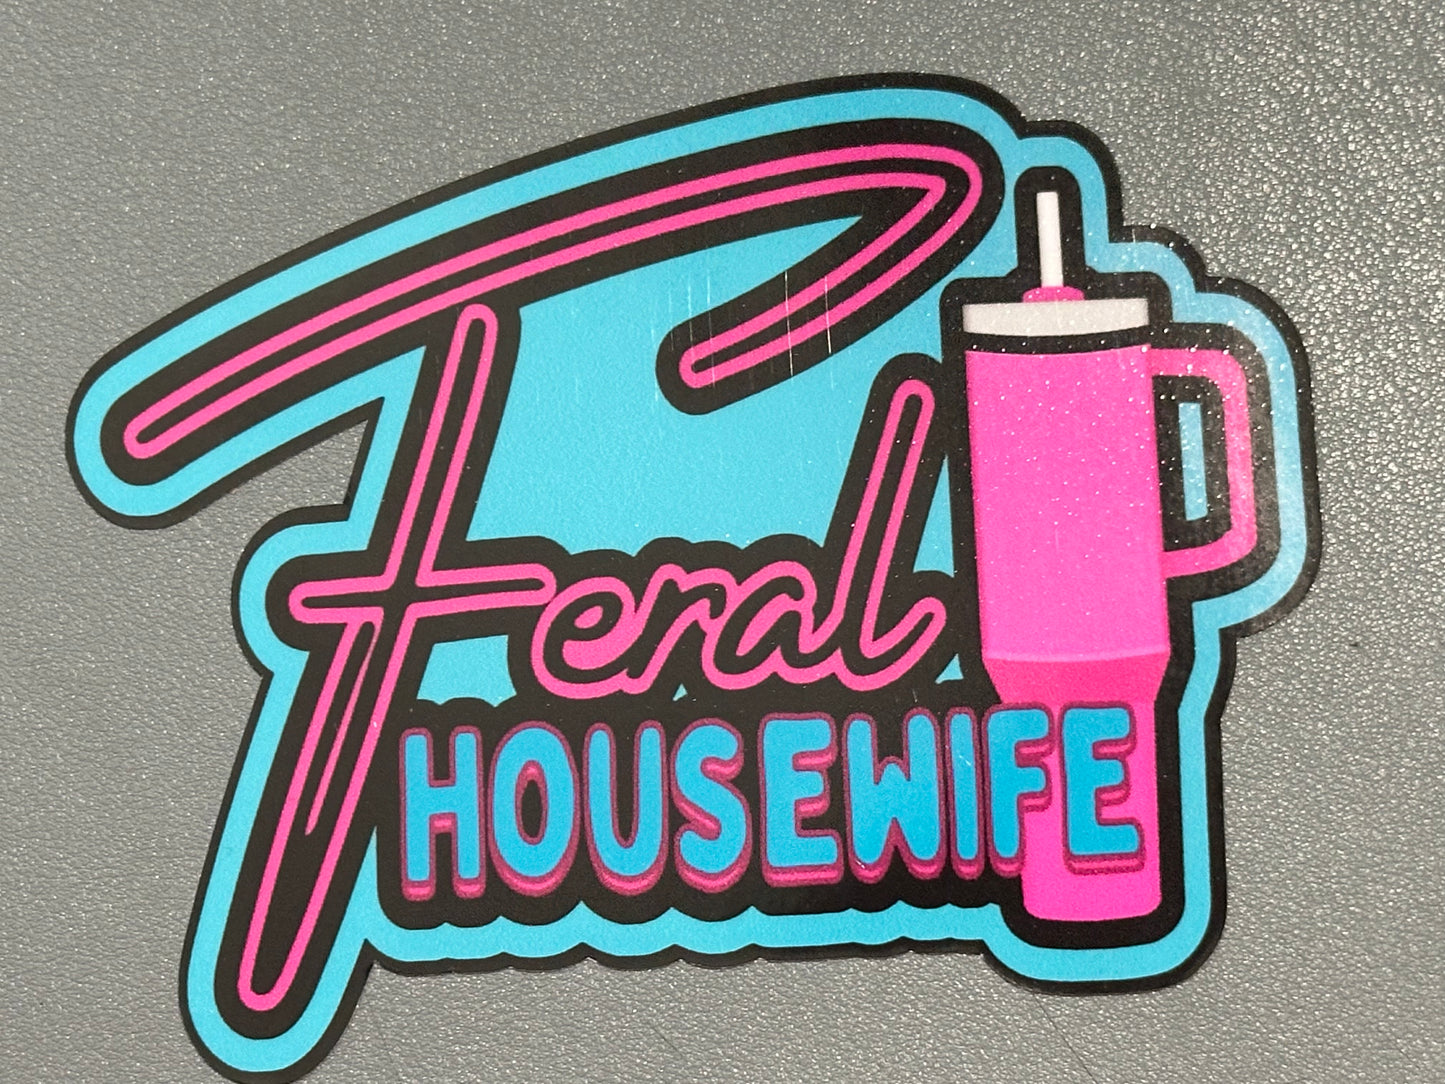 Feral Housewife Cup Decal 5x4.5 inches